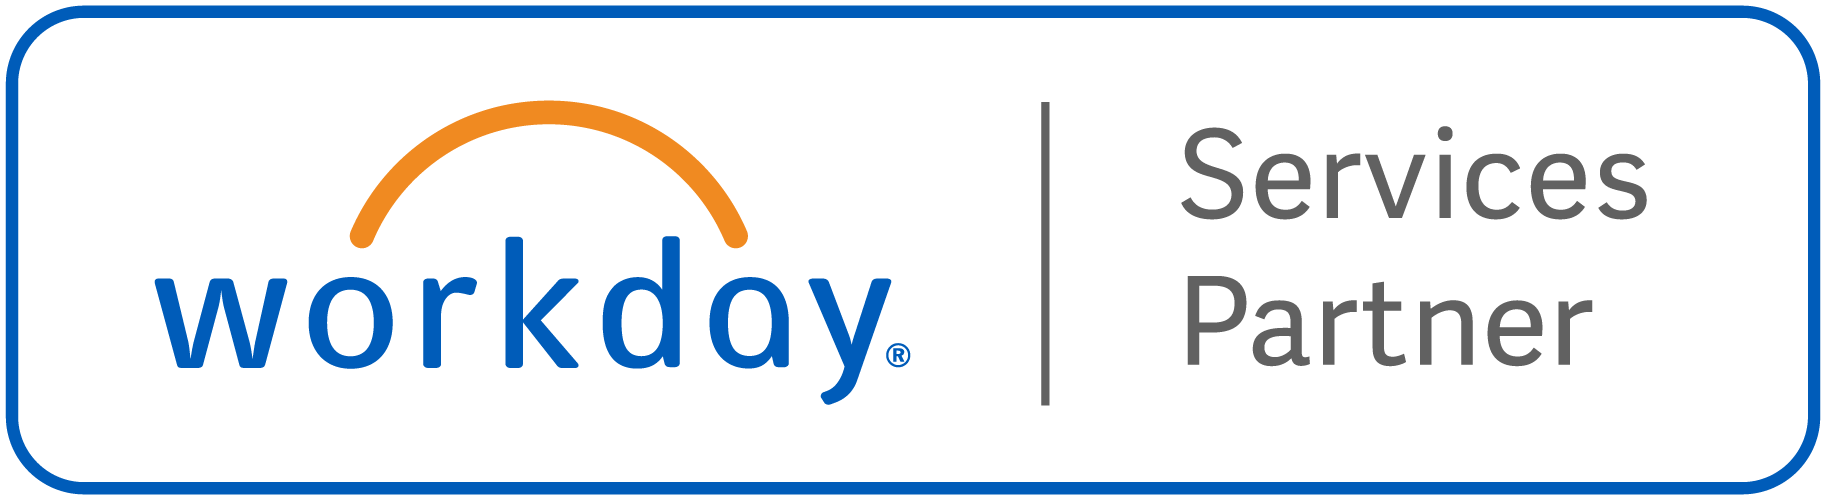 2021 Workday Services Partners Logo